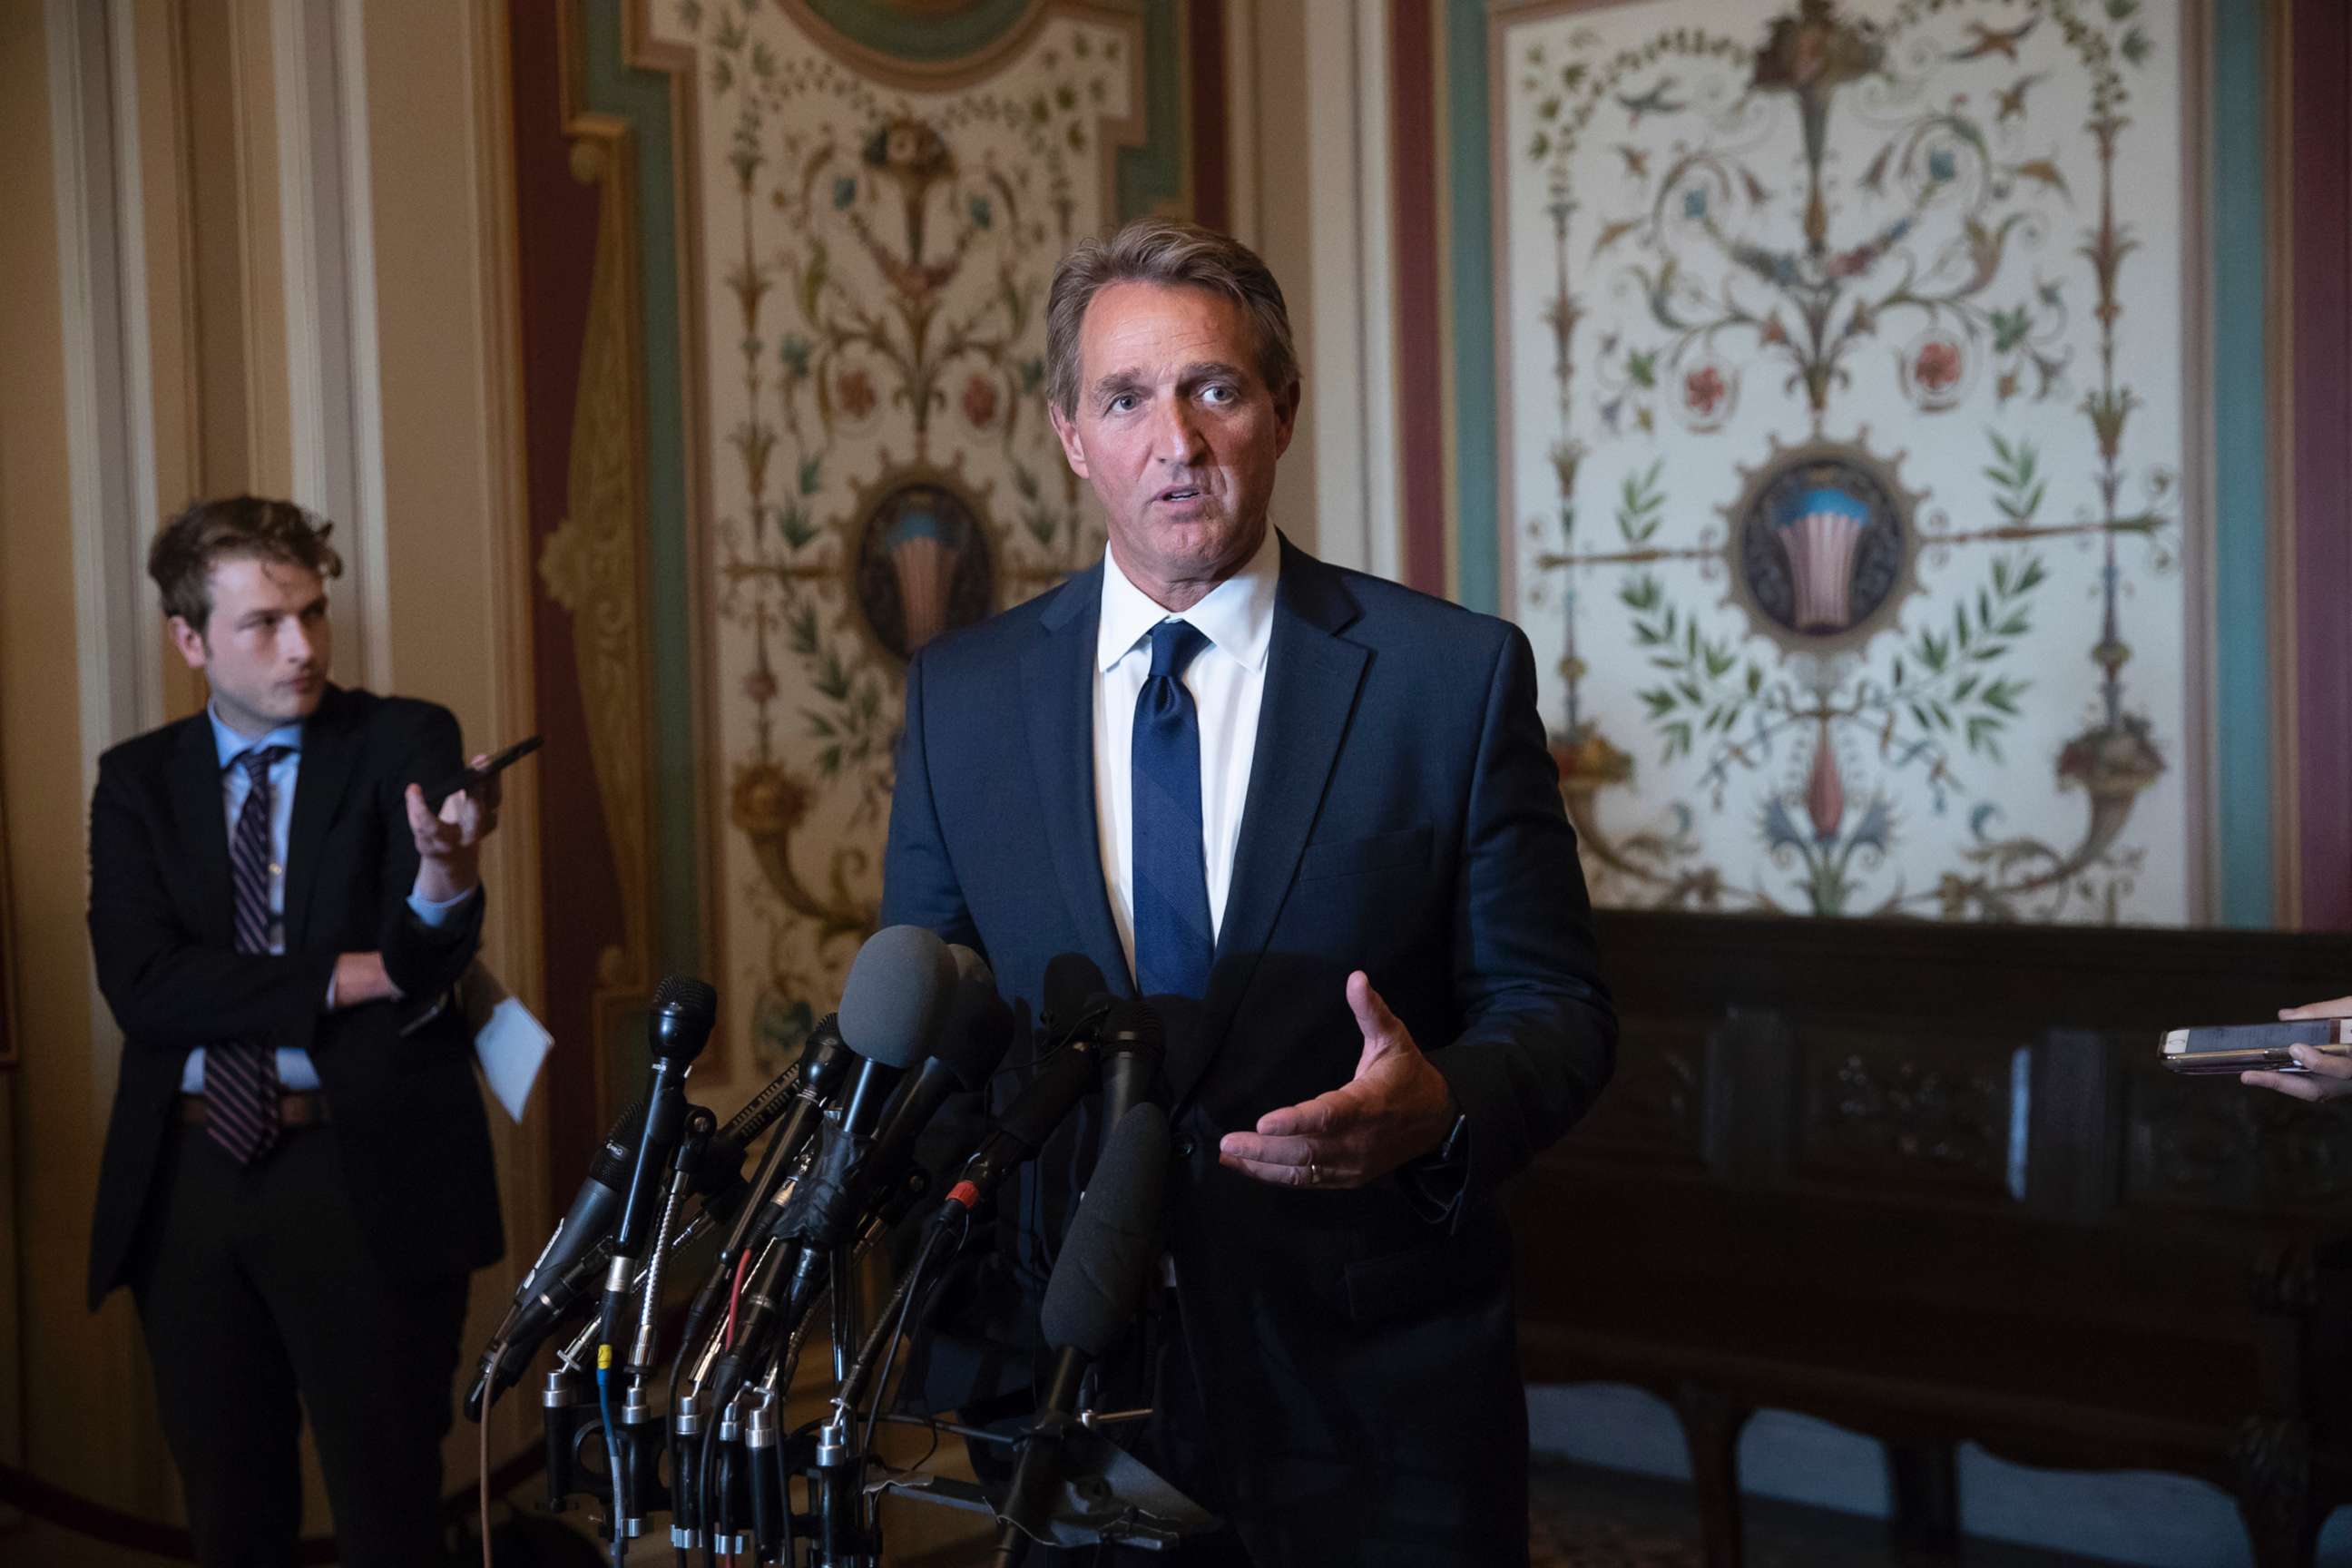 PHOTO: Sen. Jeff Flake speaks with reporters on Capitol Hill in Washington, D.C., June 13, 2018.